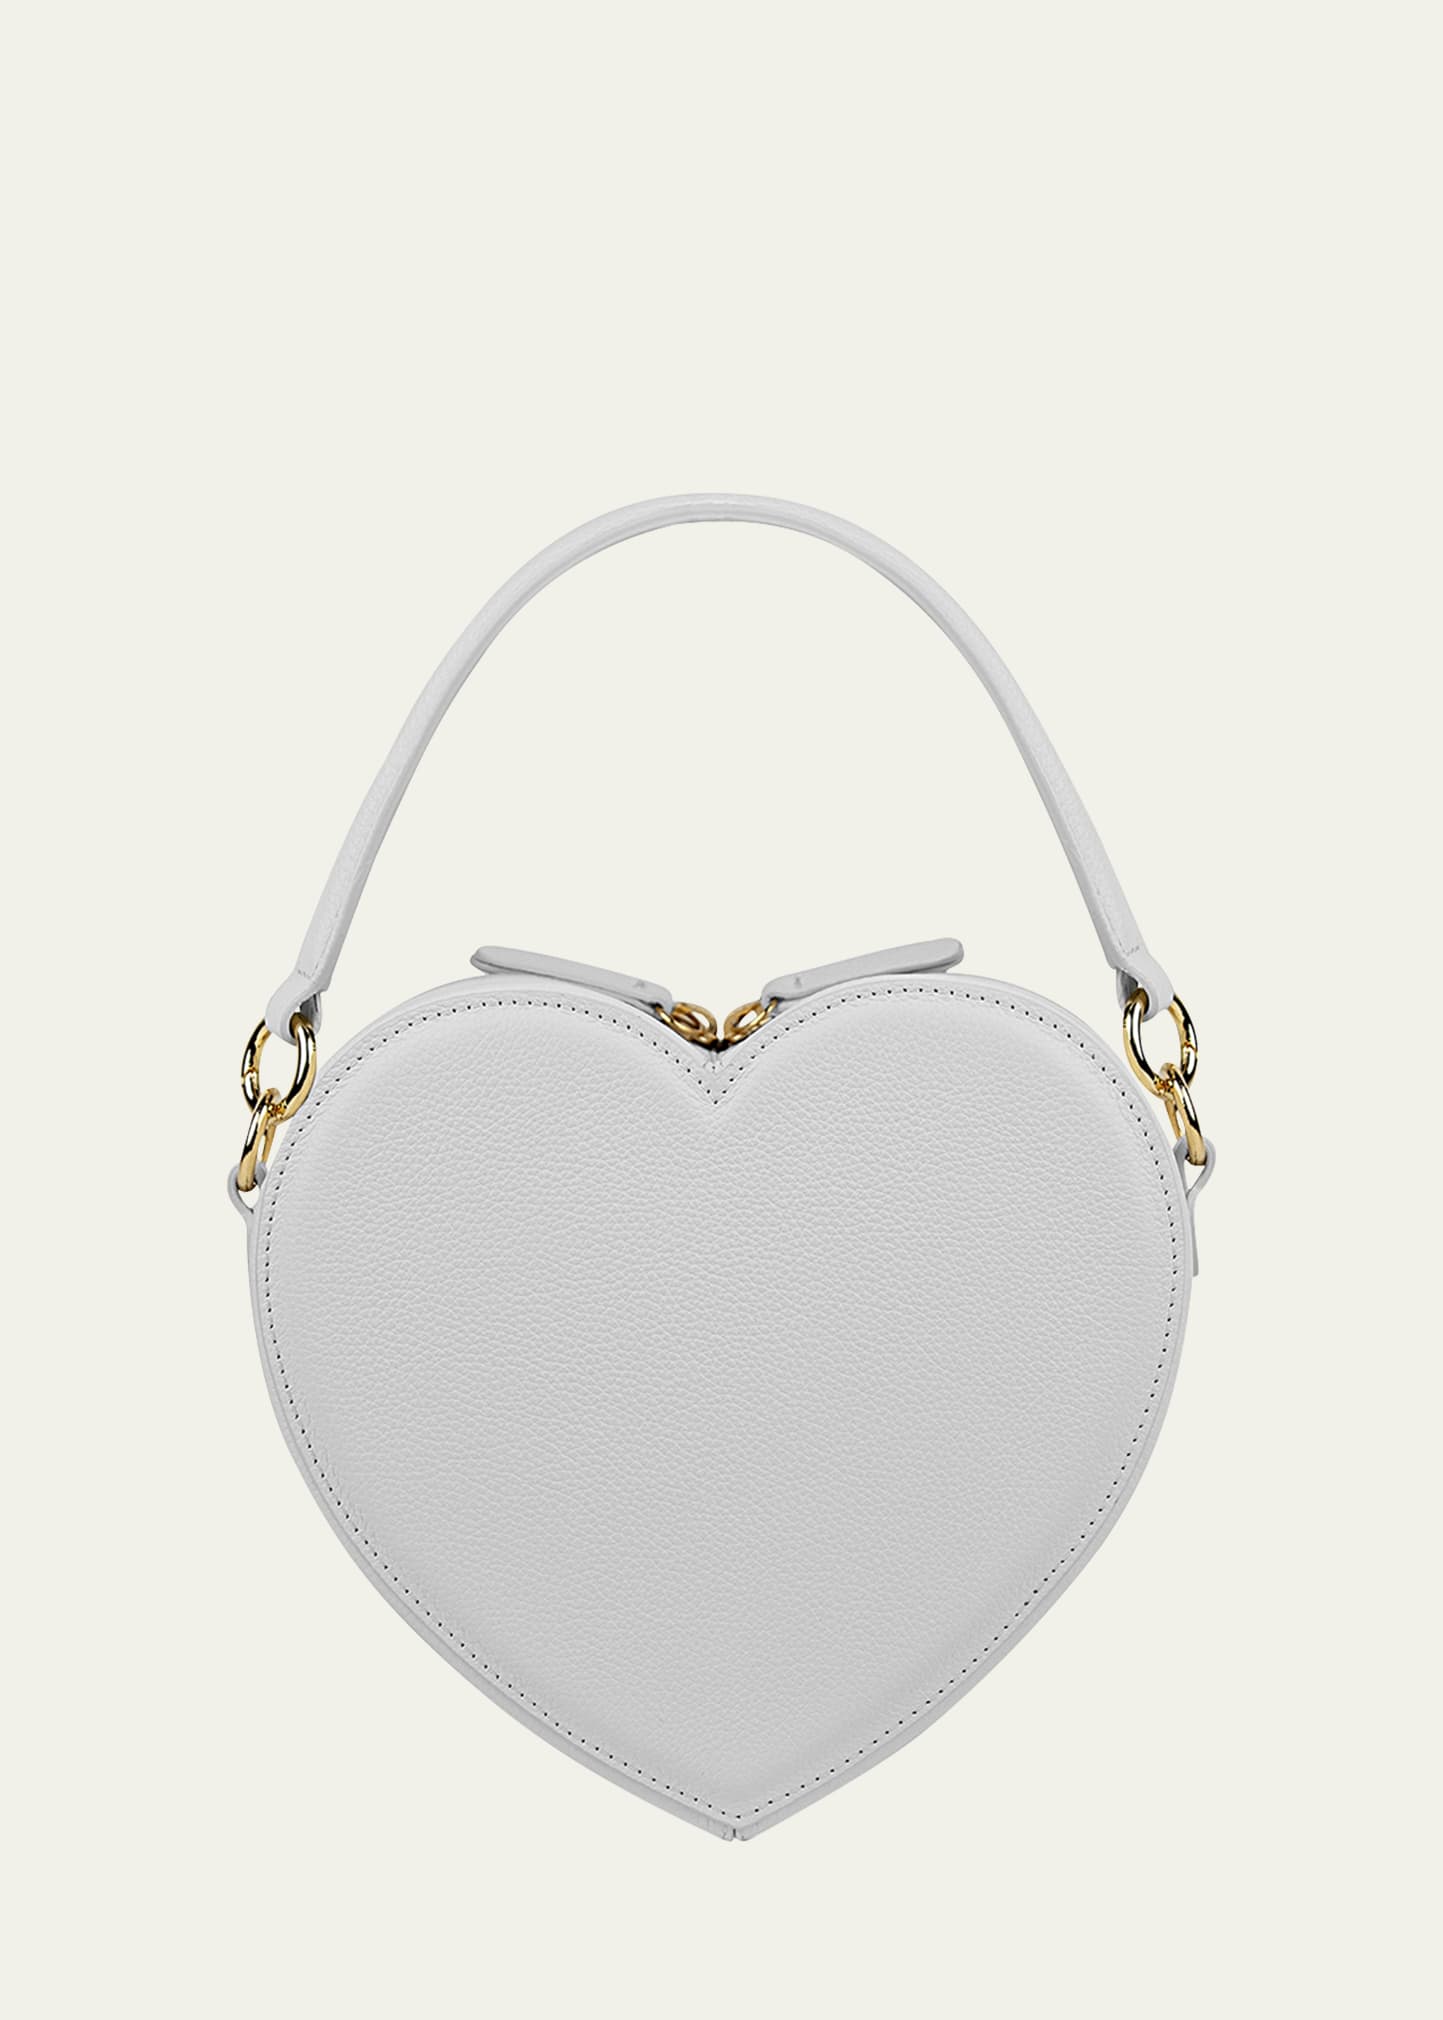 Liselle Kiss Harley Heart Leather Top-handle Bag In White Pebble/gold